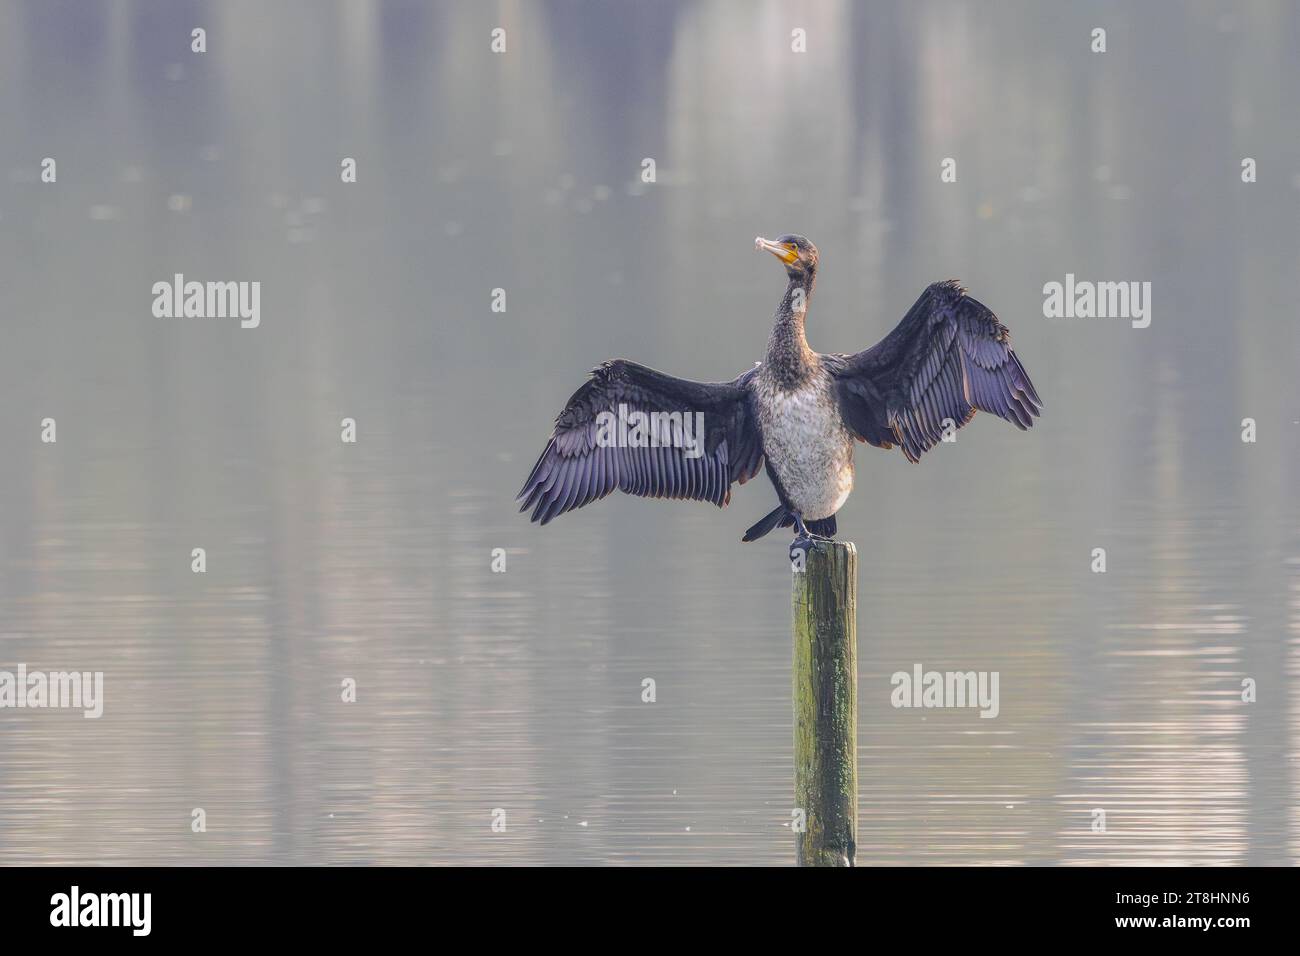 Close up of a Great Cormorant, Phalacrocorax carbo, standing on a pole in the water in a misty background with wet wings spread in an attempt to dry t Stock Photo